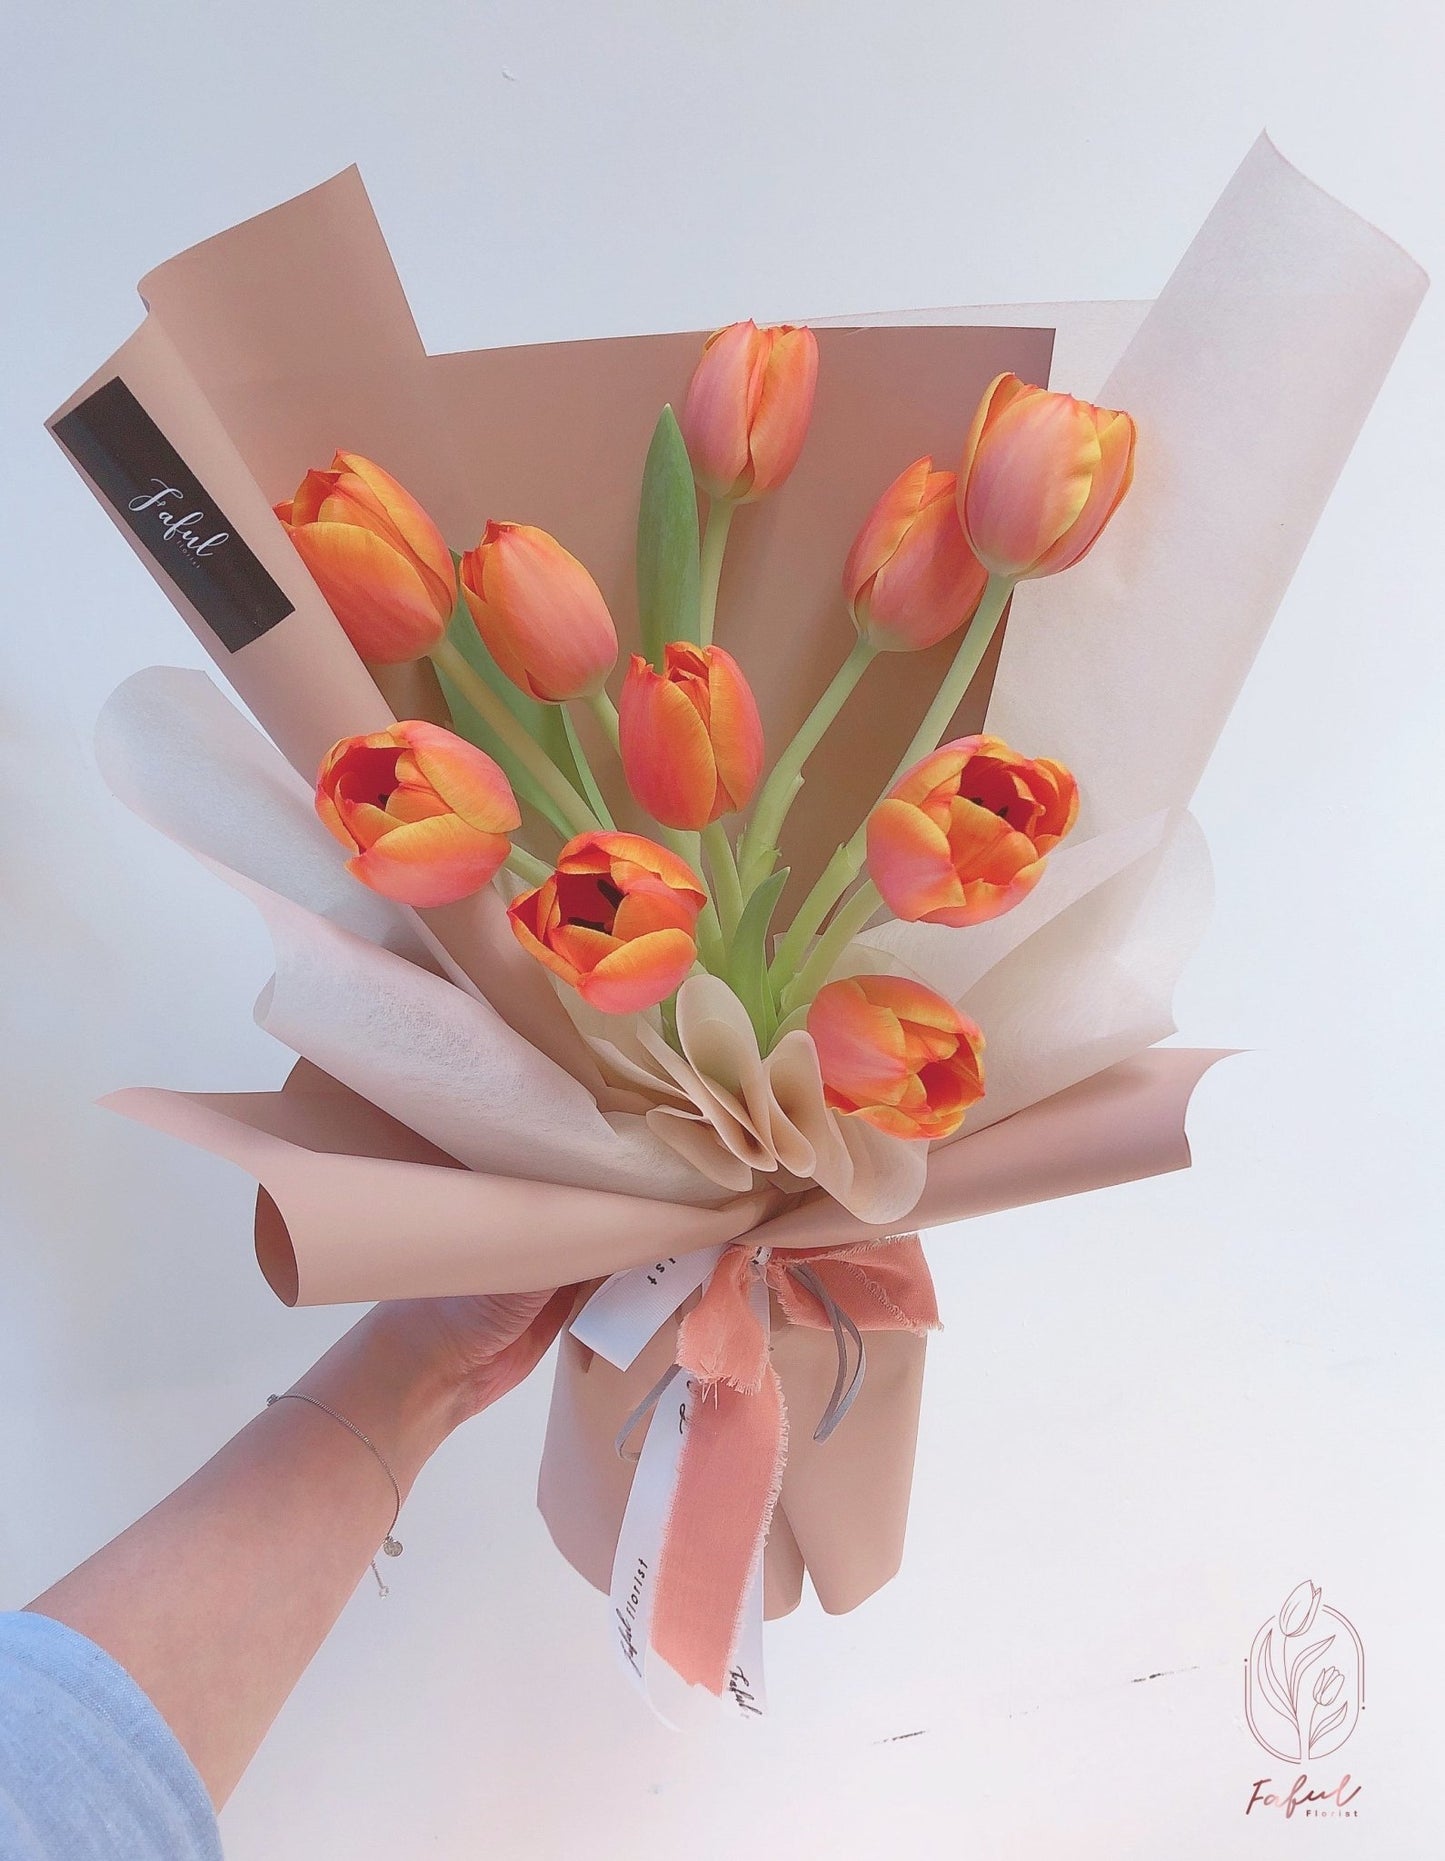 "Tulip Flowers" - A simple yet elegant arrangement showcasing tulips in a single color, perfect flowers for flower delivery in Hong Kong.